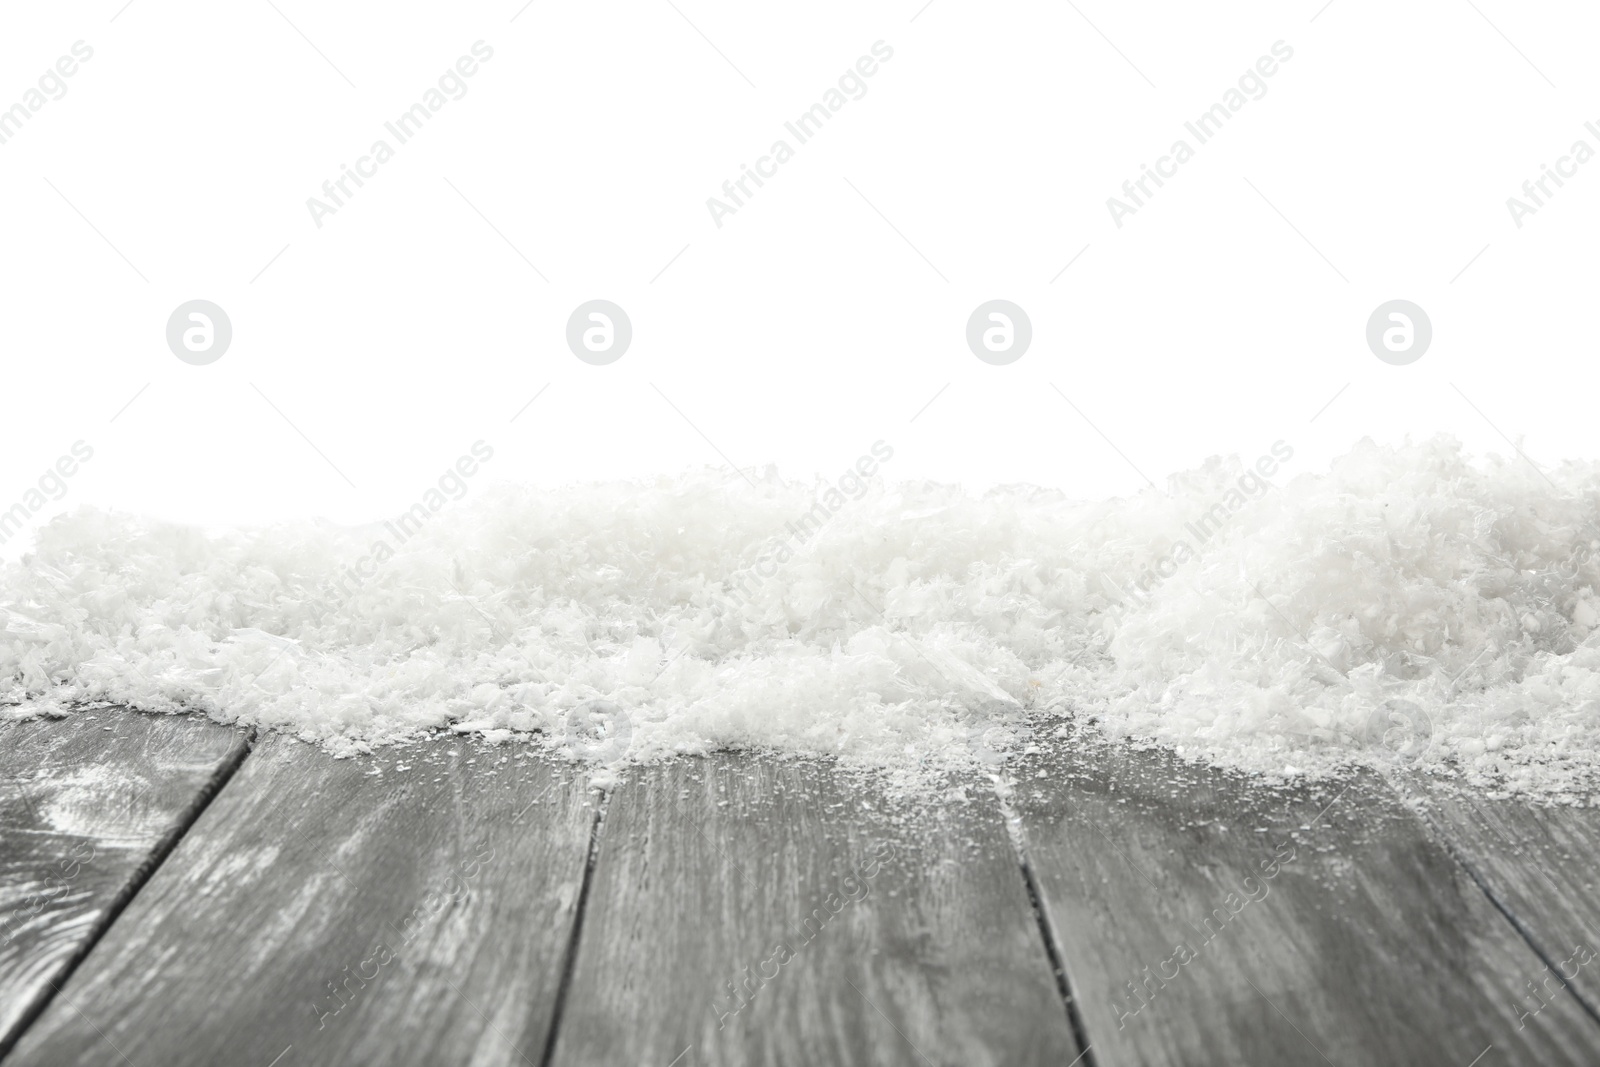 Photo of Snow on grey wooden surface against white background. Christmas season